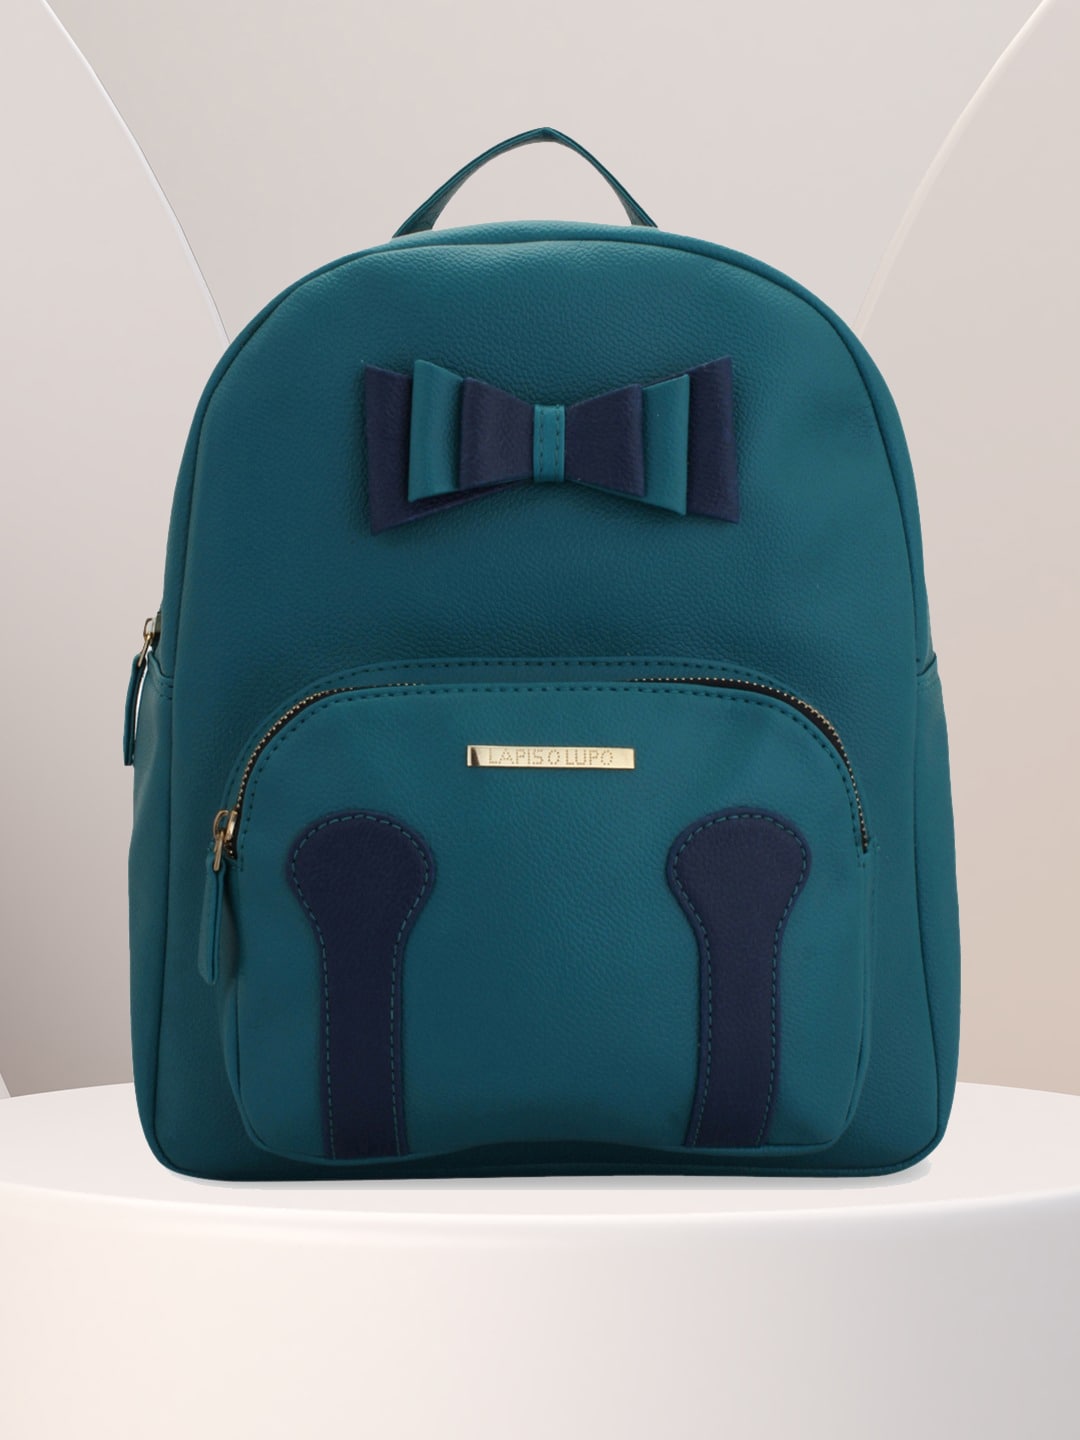 Lapis O Lupo Women Teal Blue Solid Backpack Price in India